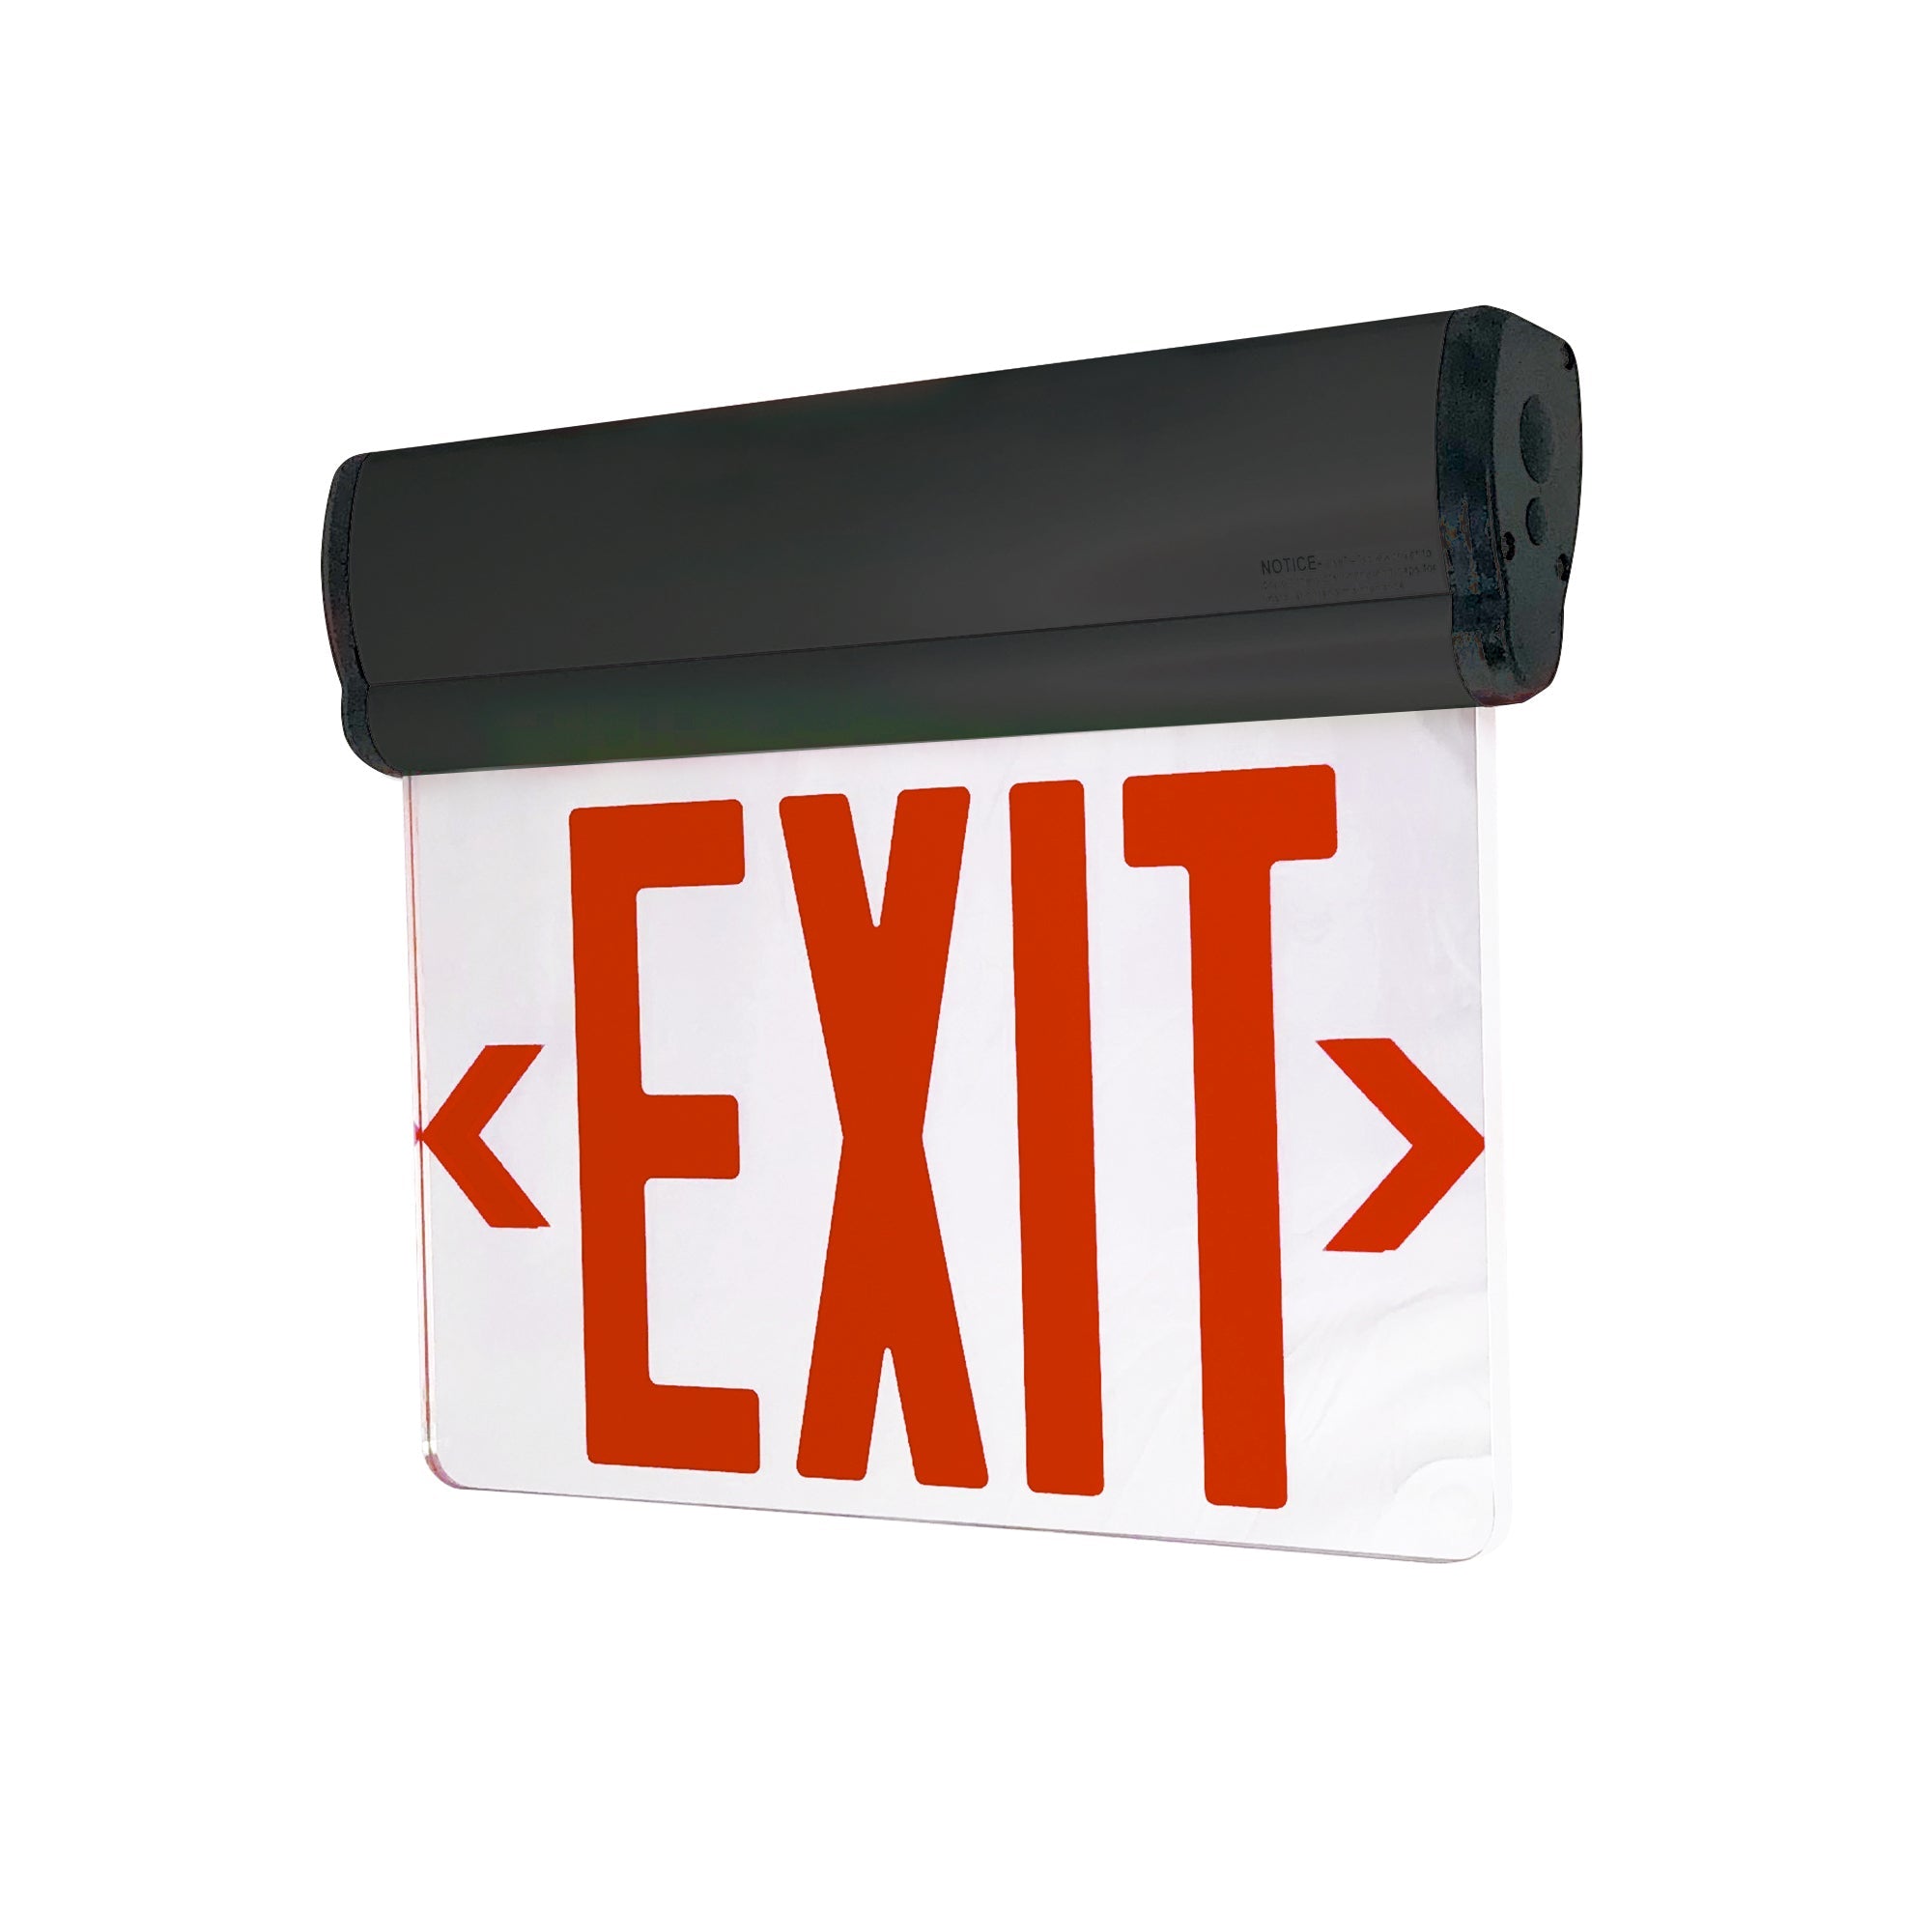 Nora Lighting NX-812-LEDRMB - Exit / Emergency - Surface Adjustable LED Edge-Lit Exit Sign, Battery Backup, 6 Inch Red Letters, Single Face / Mirrored Acrylic, Black Housing